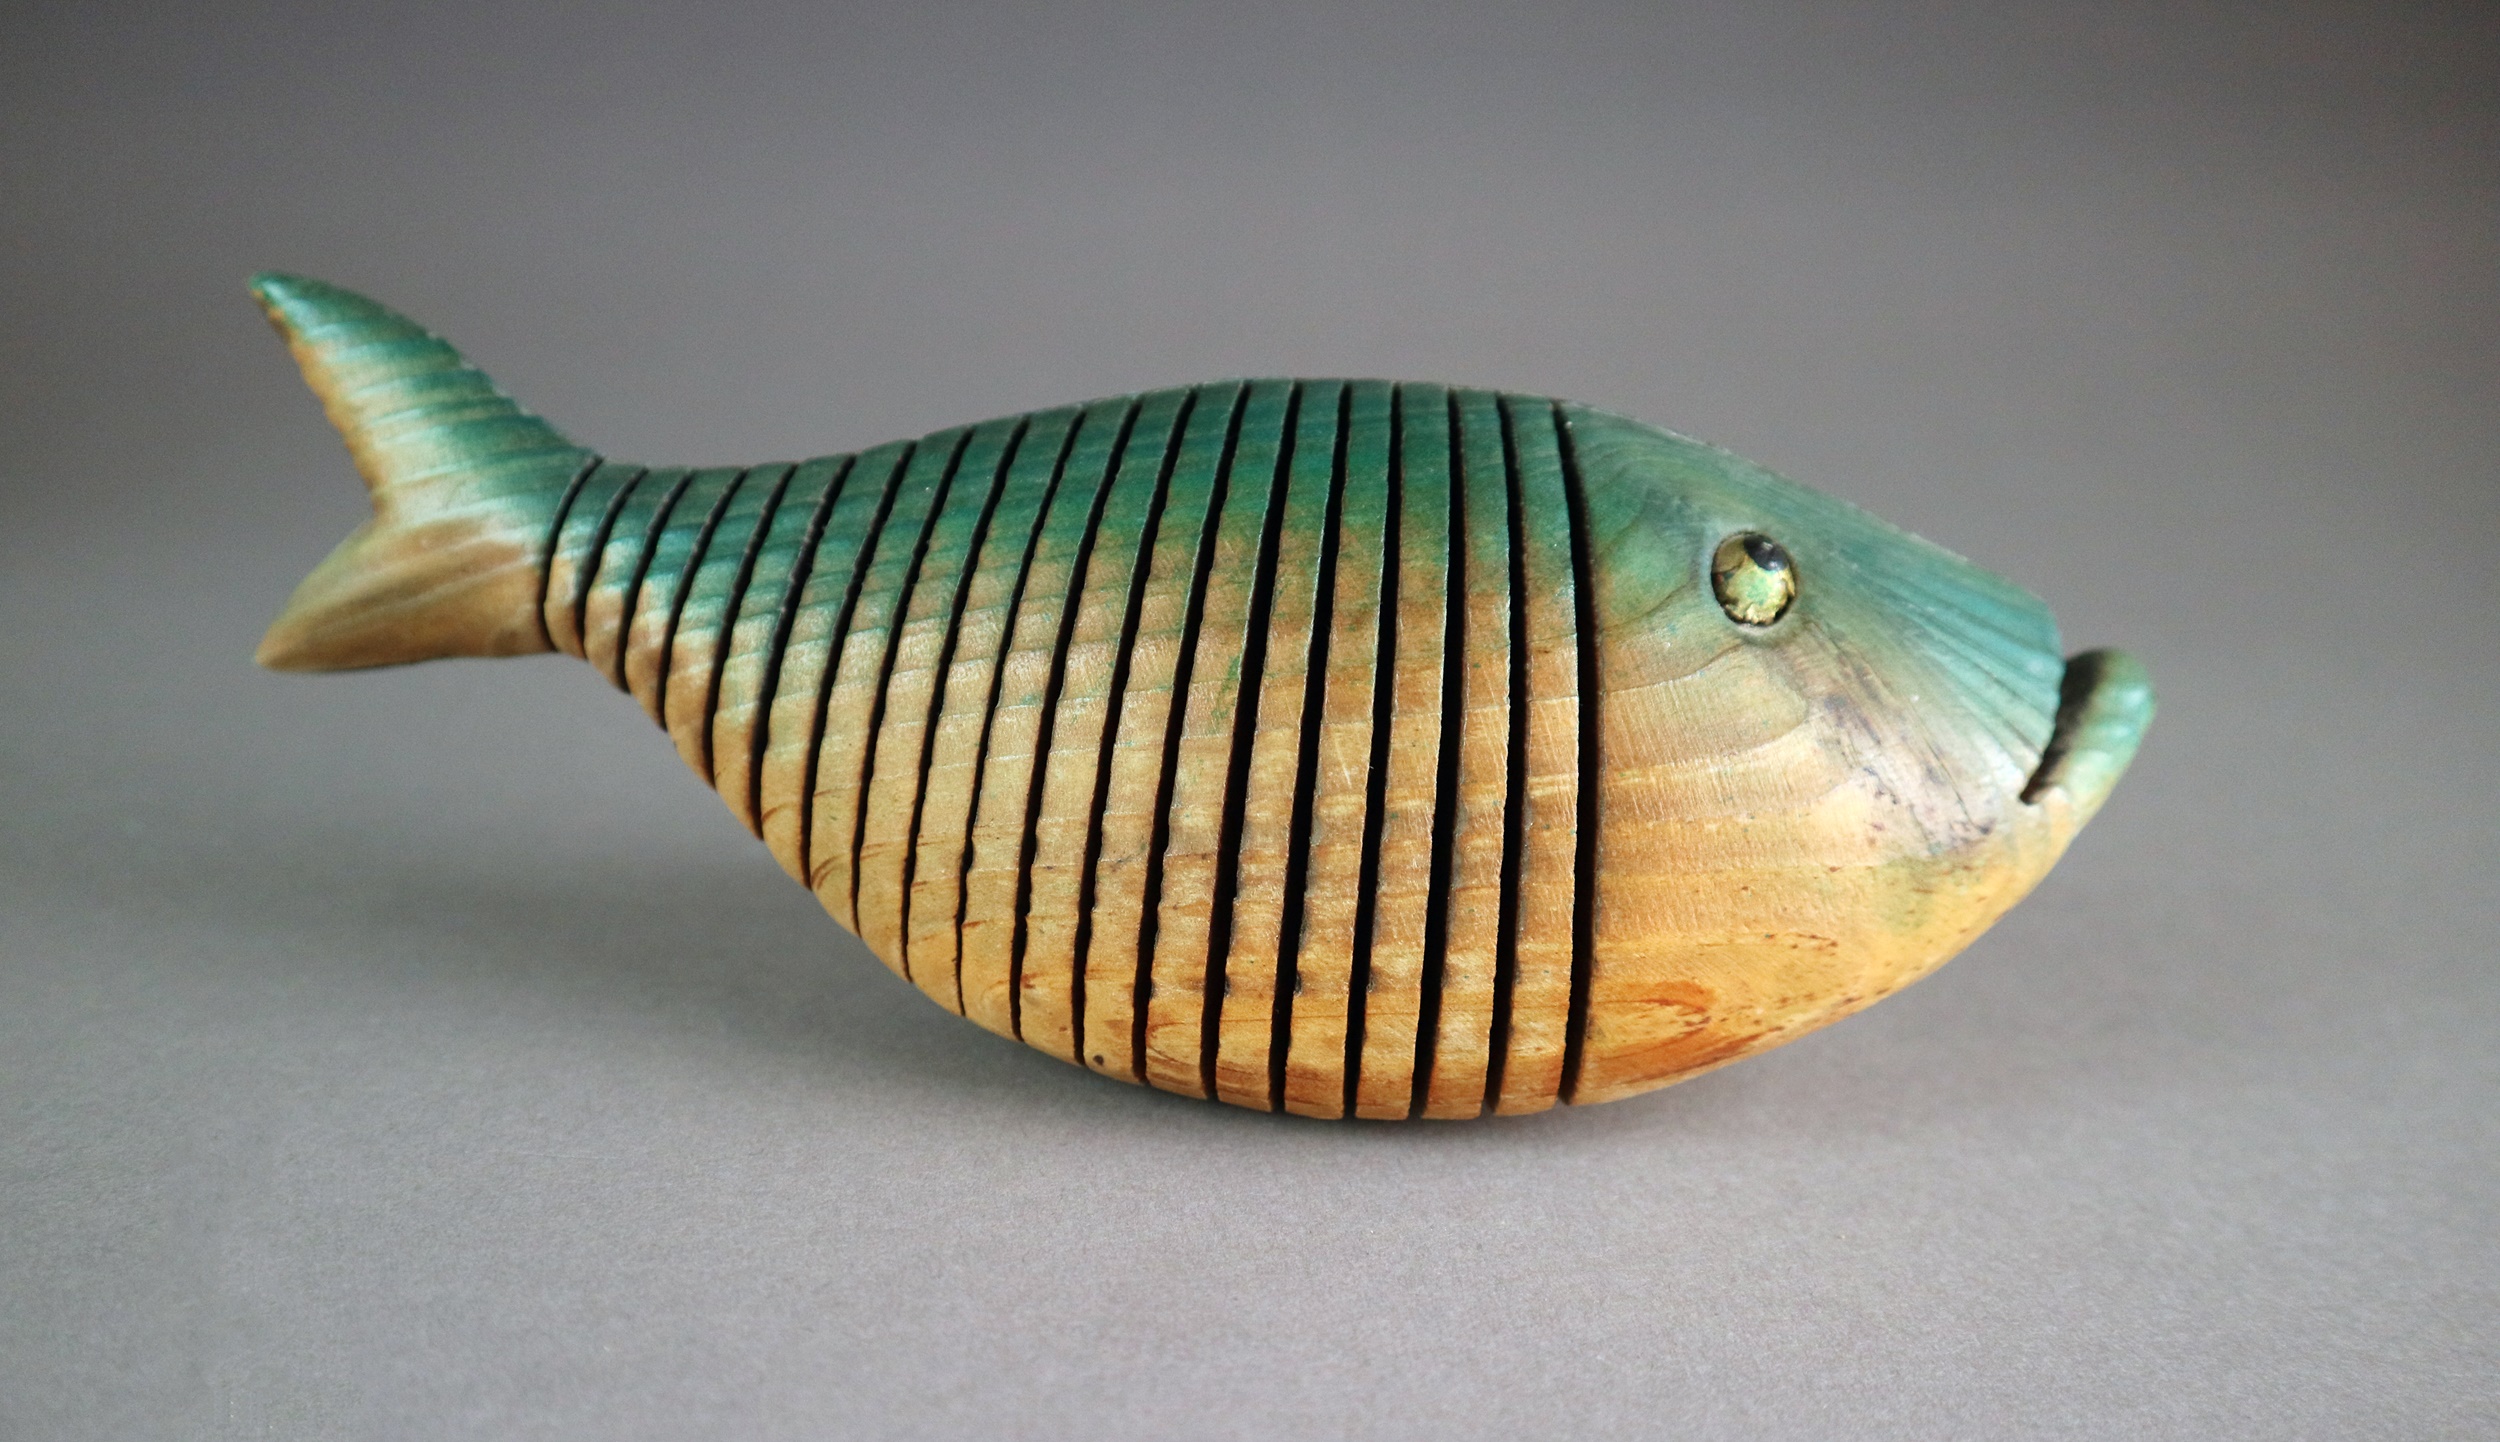 Jeff Soan (British 20th Century) Articulated Fish, wooden sculpture, measurements 9 x 24 x 7 cm - Image 3 of 3